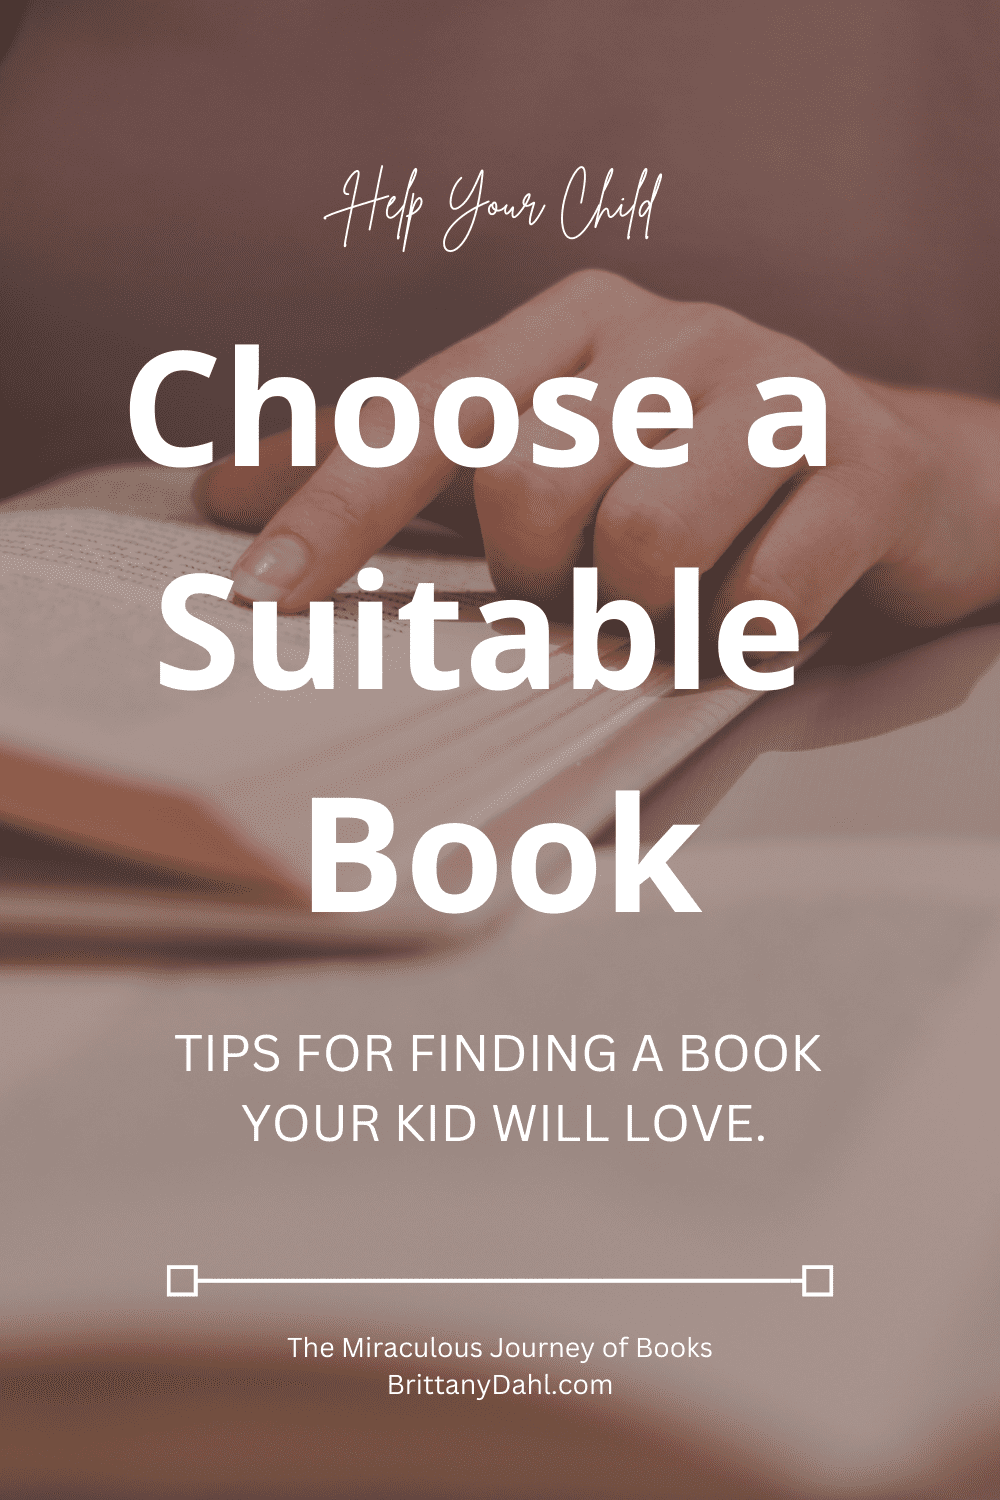 Help your child choose a suitable book. Tips for finding a book your child will love. The Miraculous Journey of Books at Brittanydahl.com. Image of open book with hand on book.